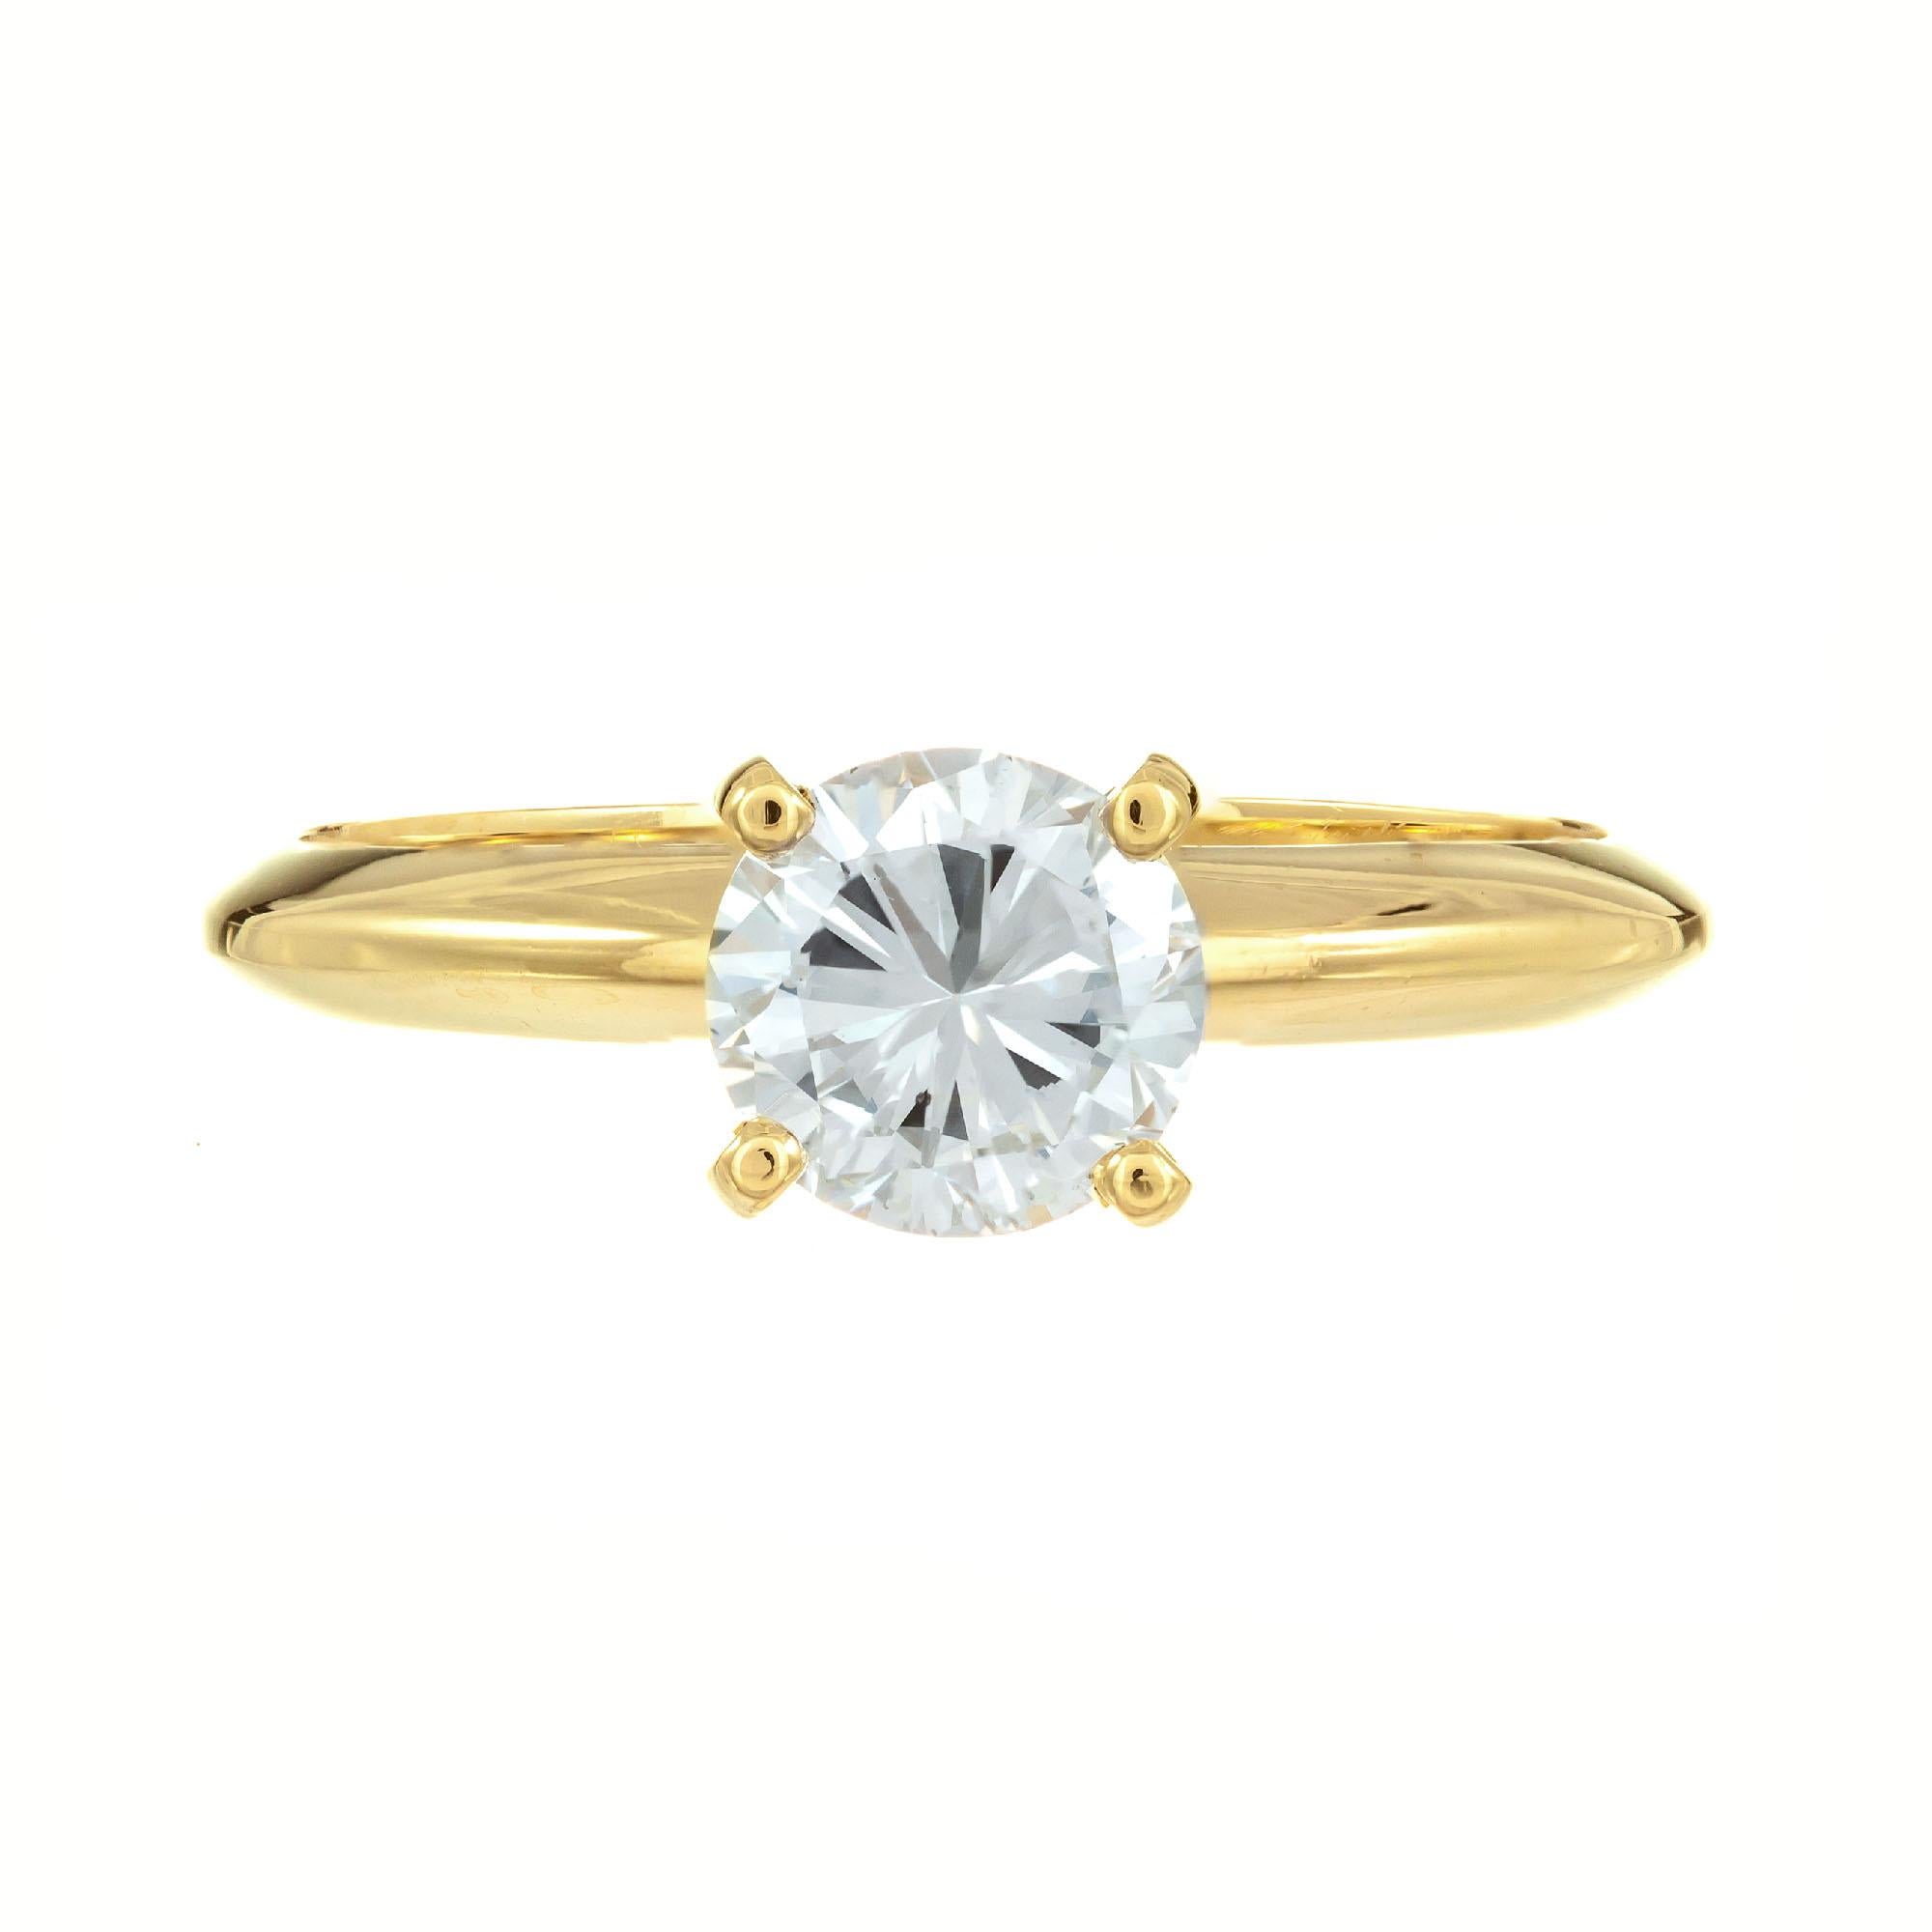 .77 carat transitional cut diamond engagement ring. GIA certified center diamond in a 14k yellow gold solitaire setting, created in the Peter Suchy workshop.

1 round brilliant cut diamond G SI2, approx. .77ct GIA Certificate #5201097300
Size 6 and